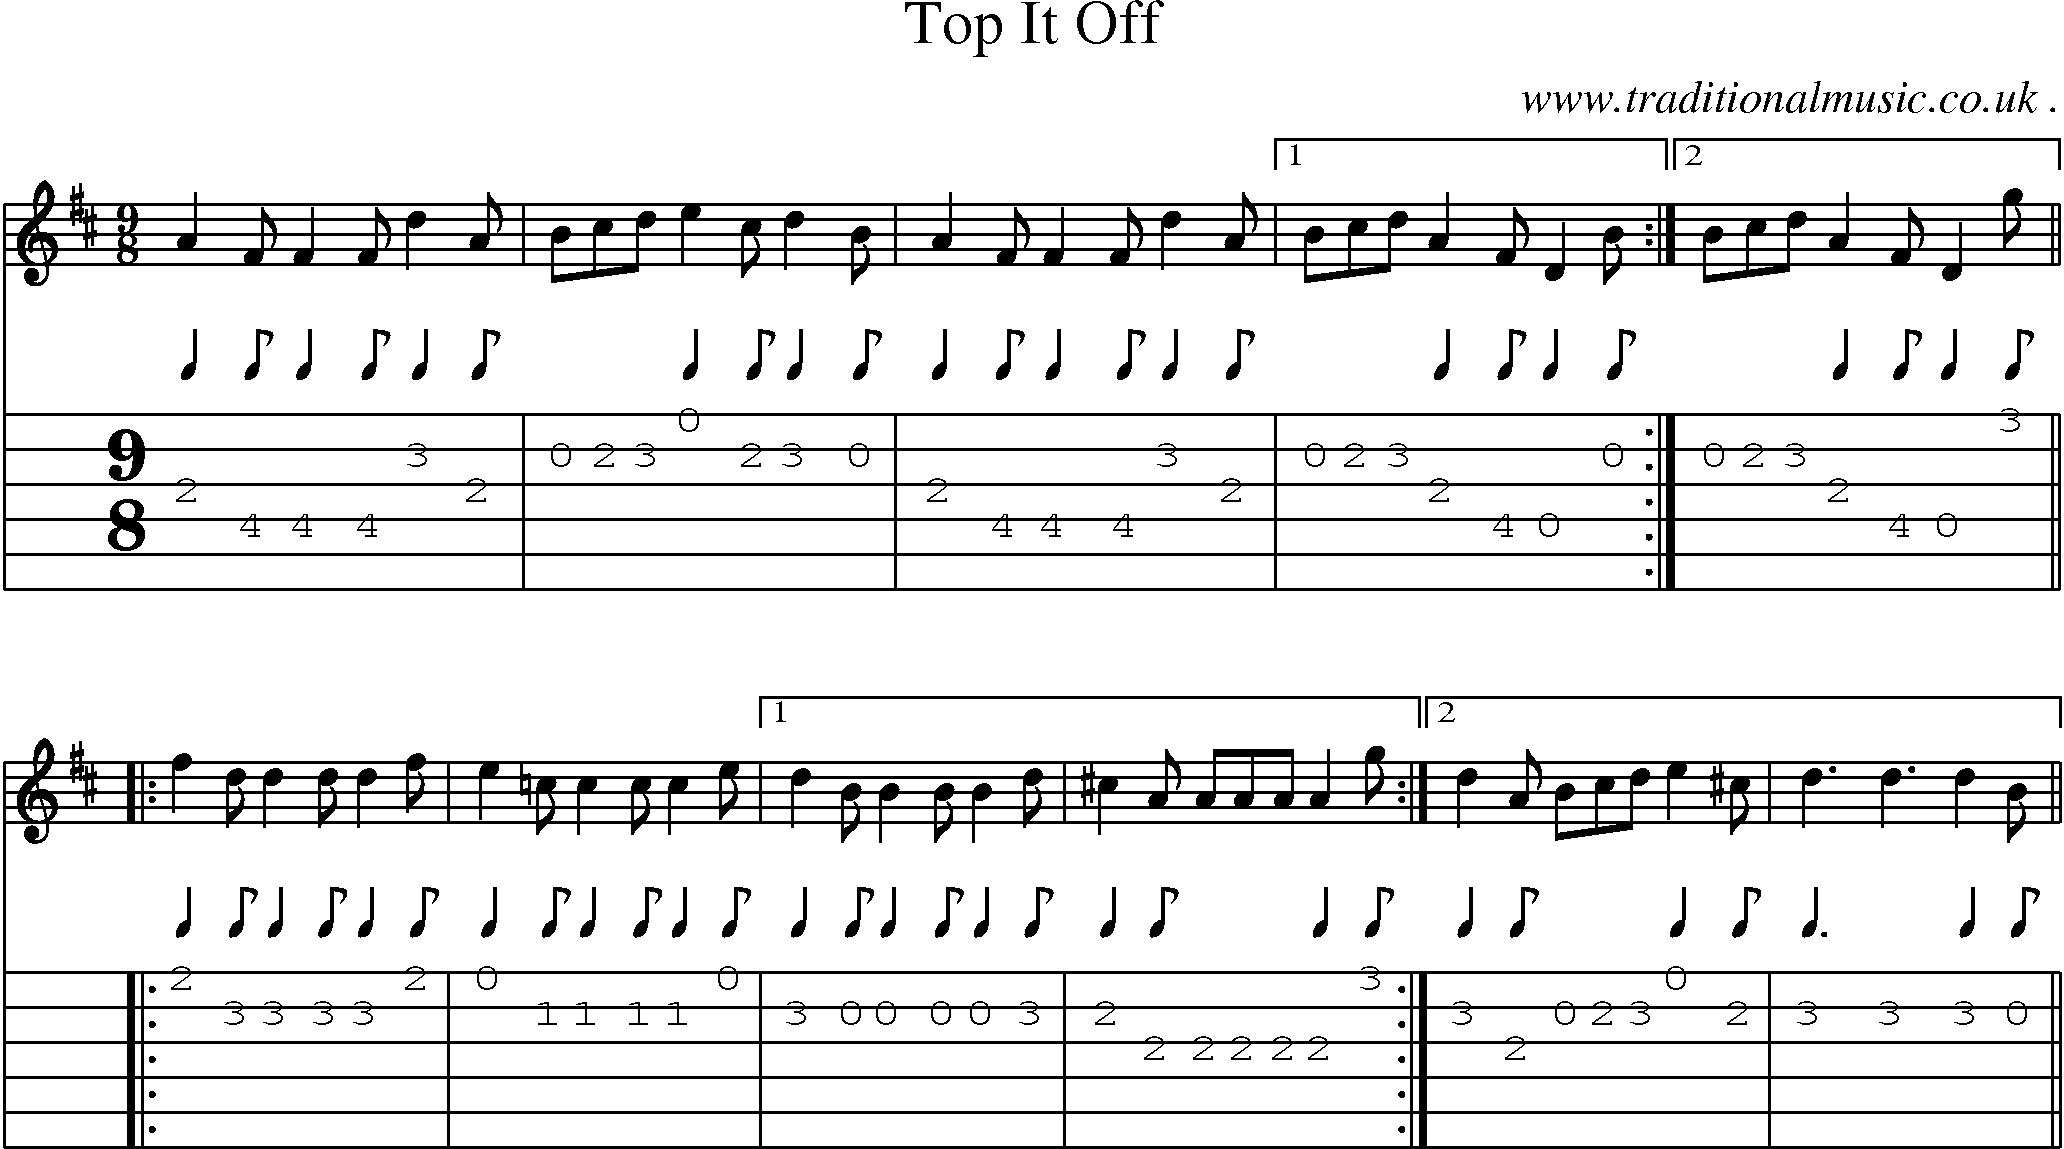 Sheet-Music and Guitar Tabs for Top It Off